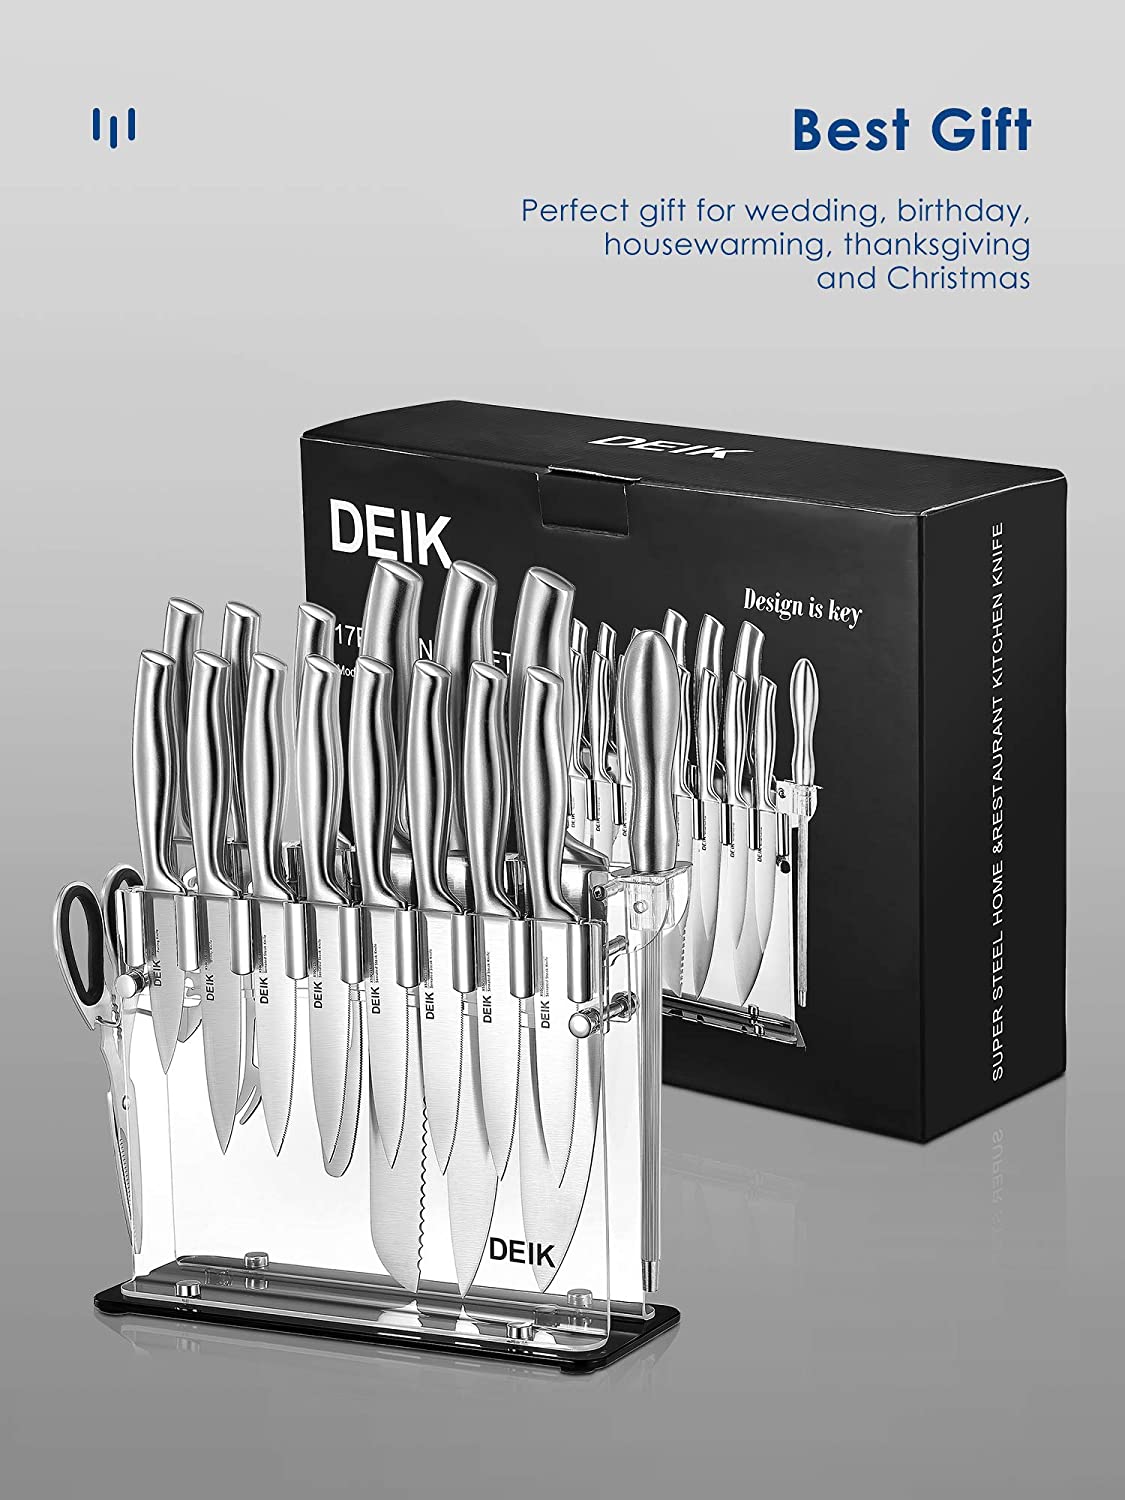 Deik Knife Set High Carbon Stainless Steel Kitchen Knife Set 17 PCS, Super Sharp Cutlery Knife Set with Acrylic Stand, Scissors and Serrated Steak Knives, Good Gift For A Family